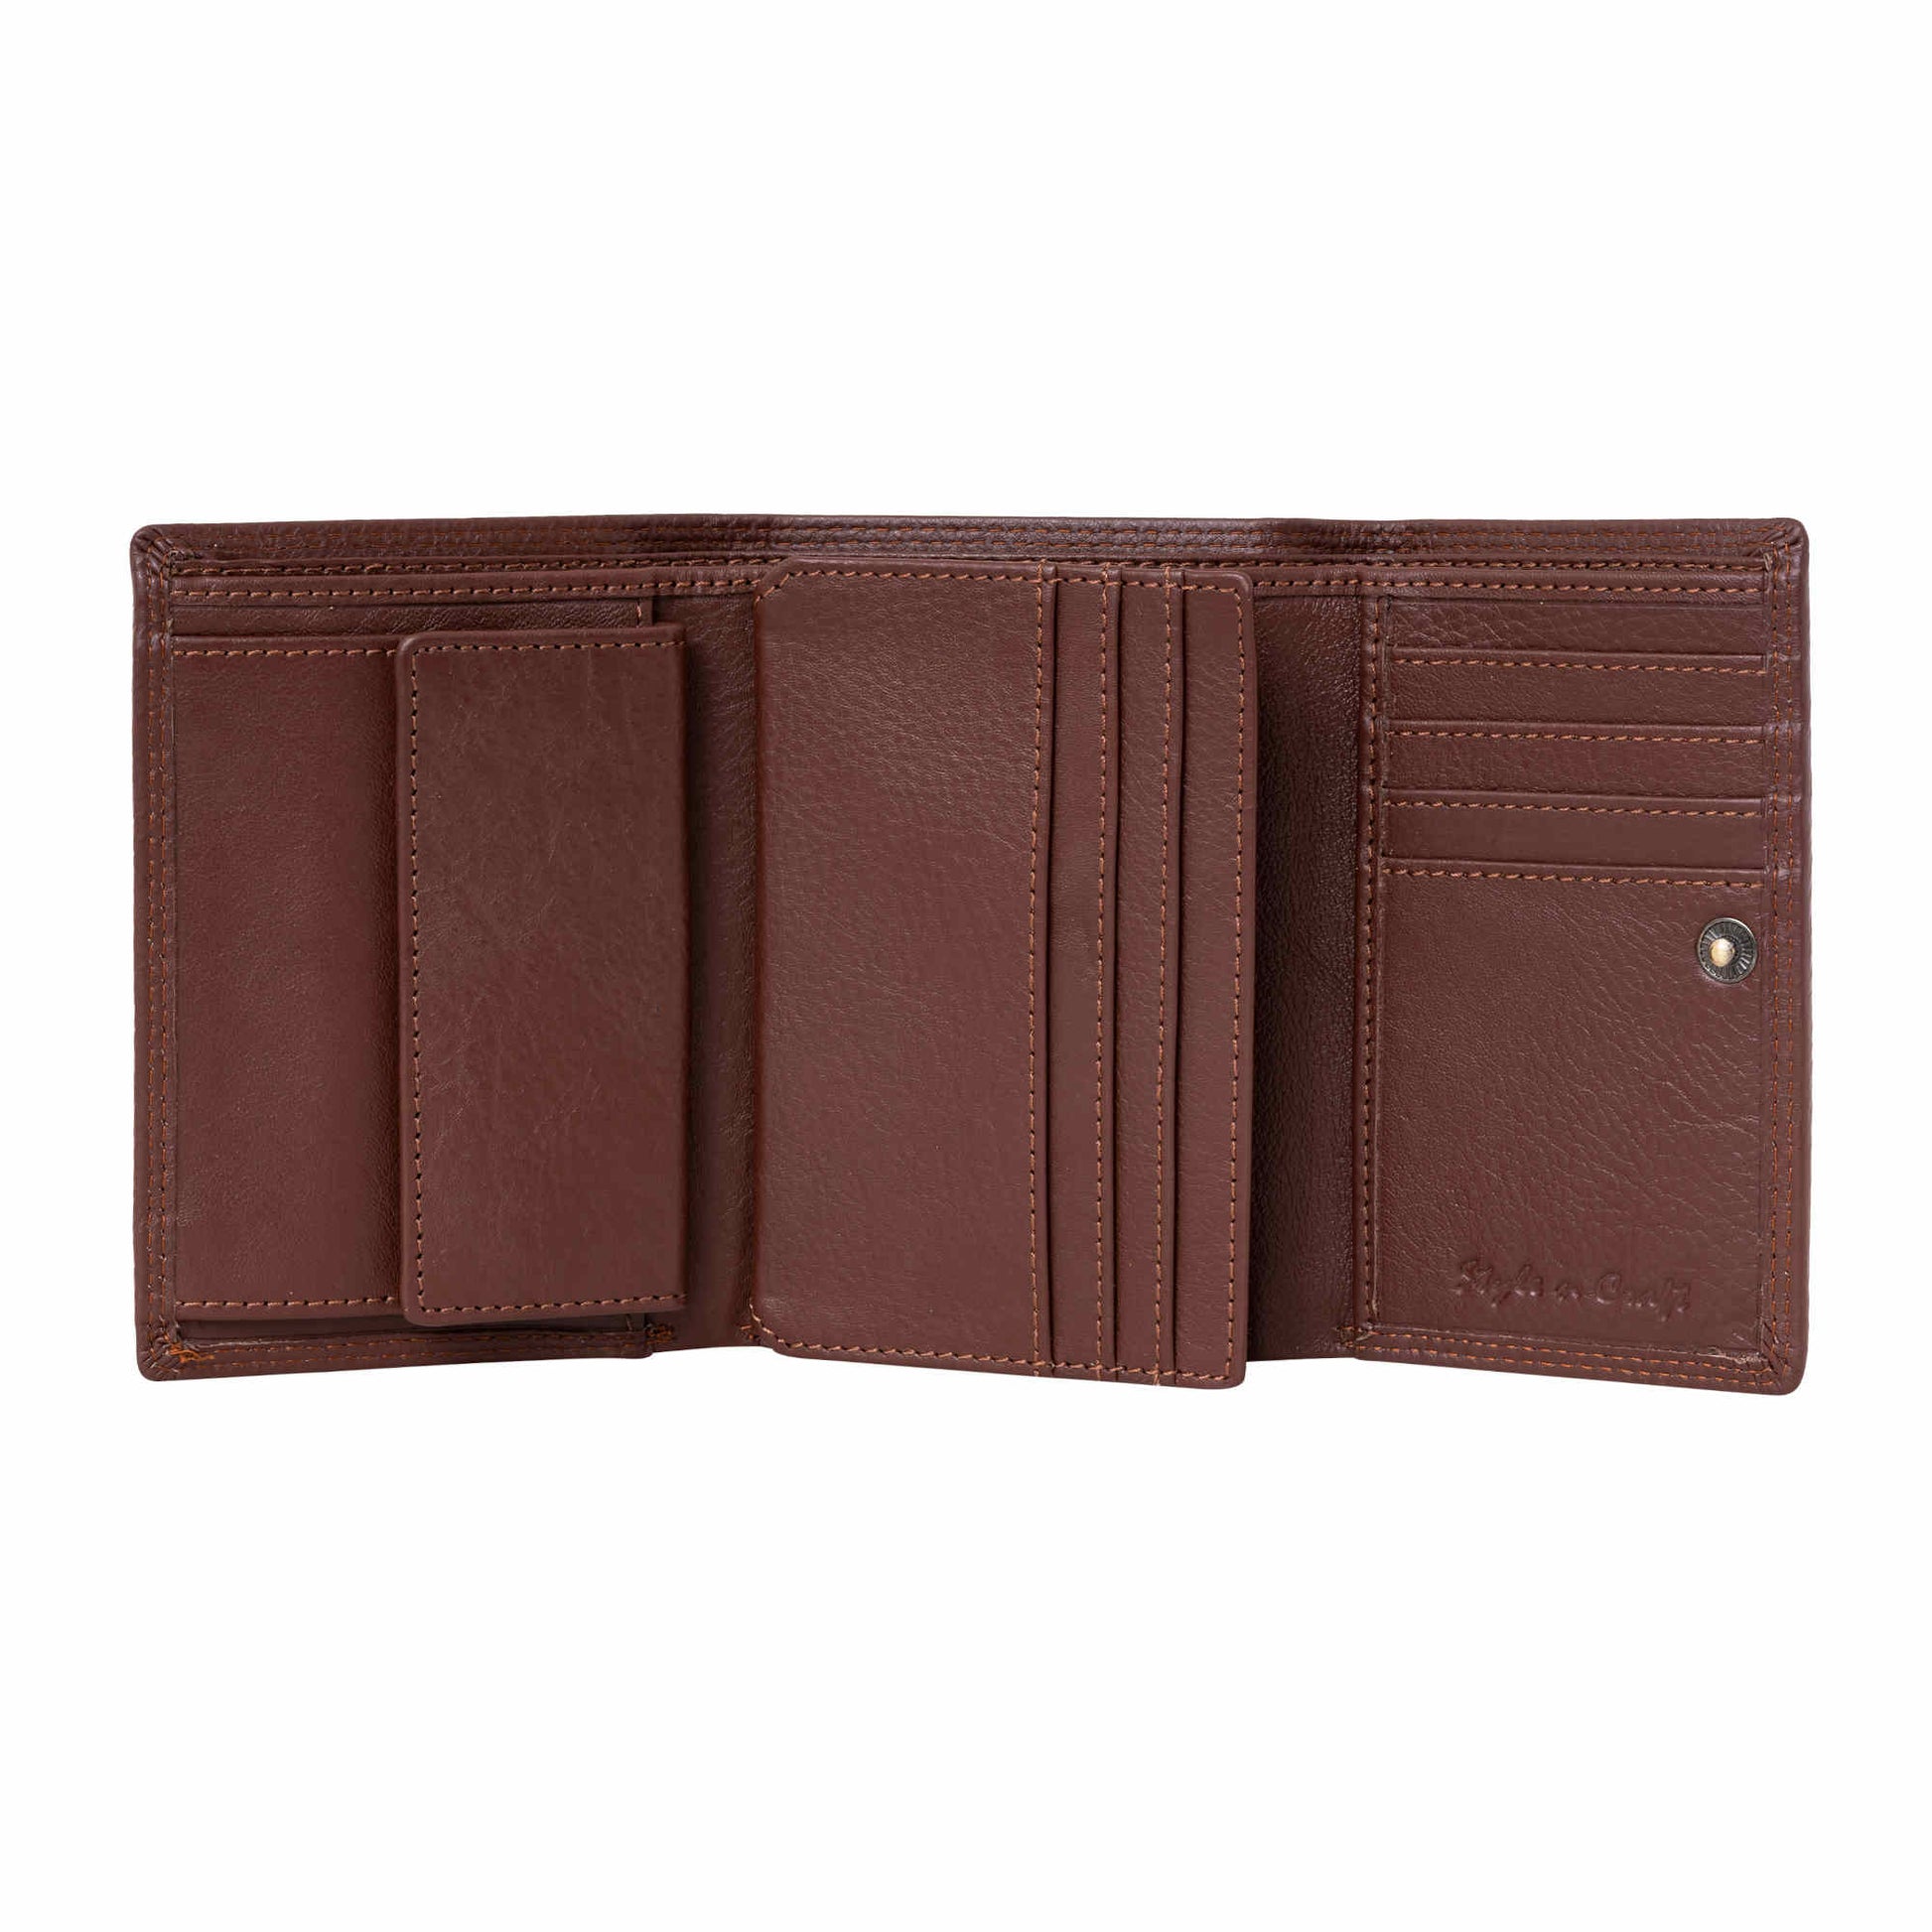 Style n Craft 391109 Ladies Trifold Brown Leather Wallet with Snap Button Closure - Straight Open View 1 - Showing the Credit Card Pockets, Coin Pocket and the Snap Button